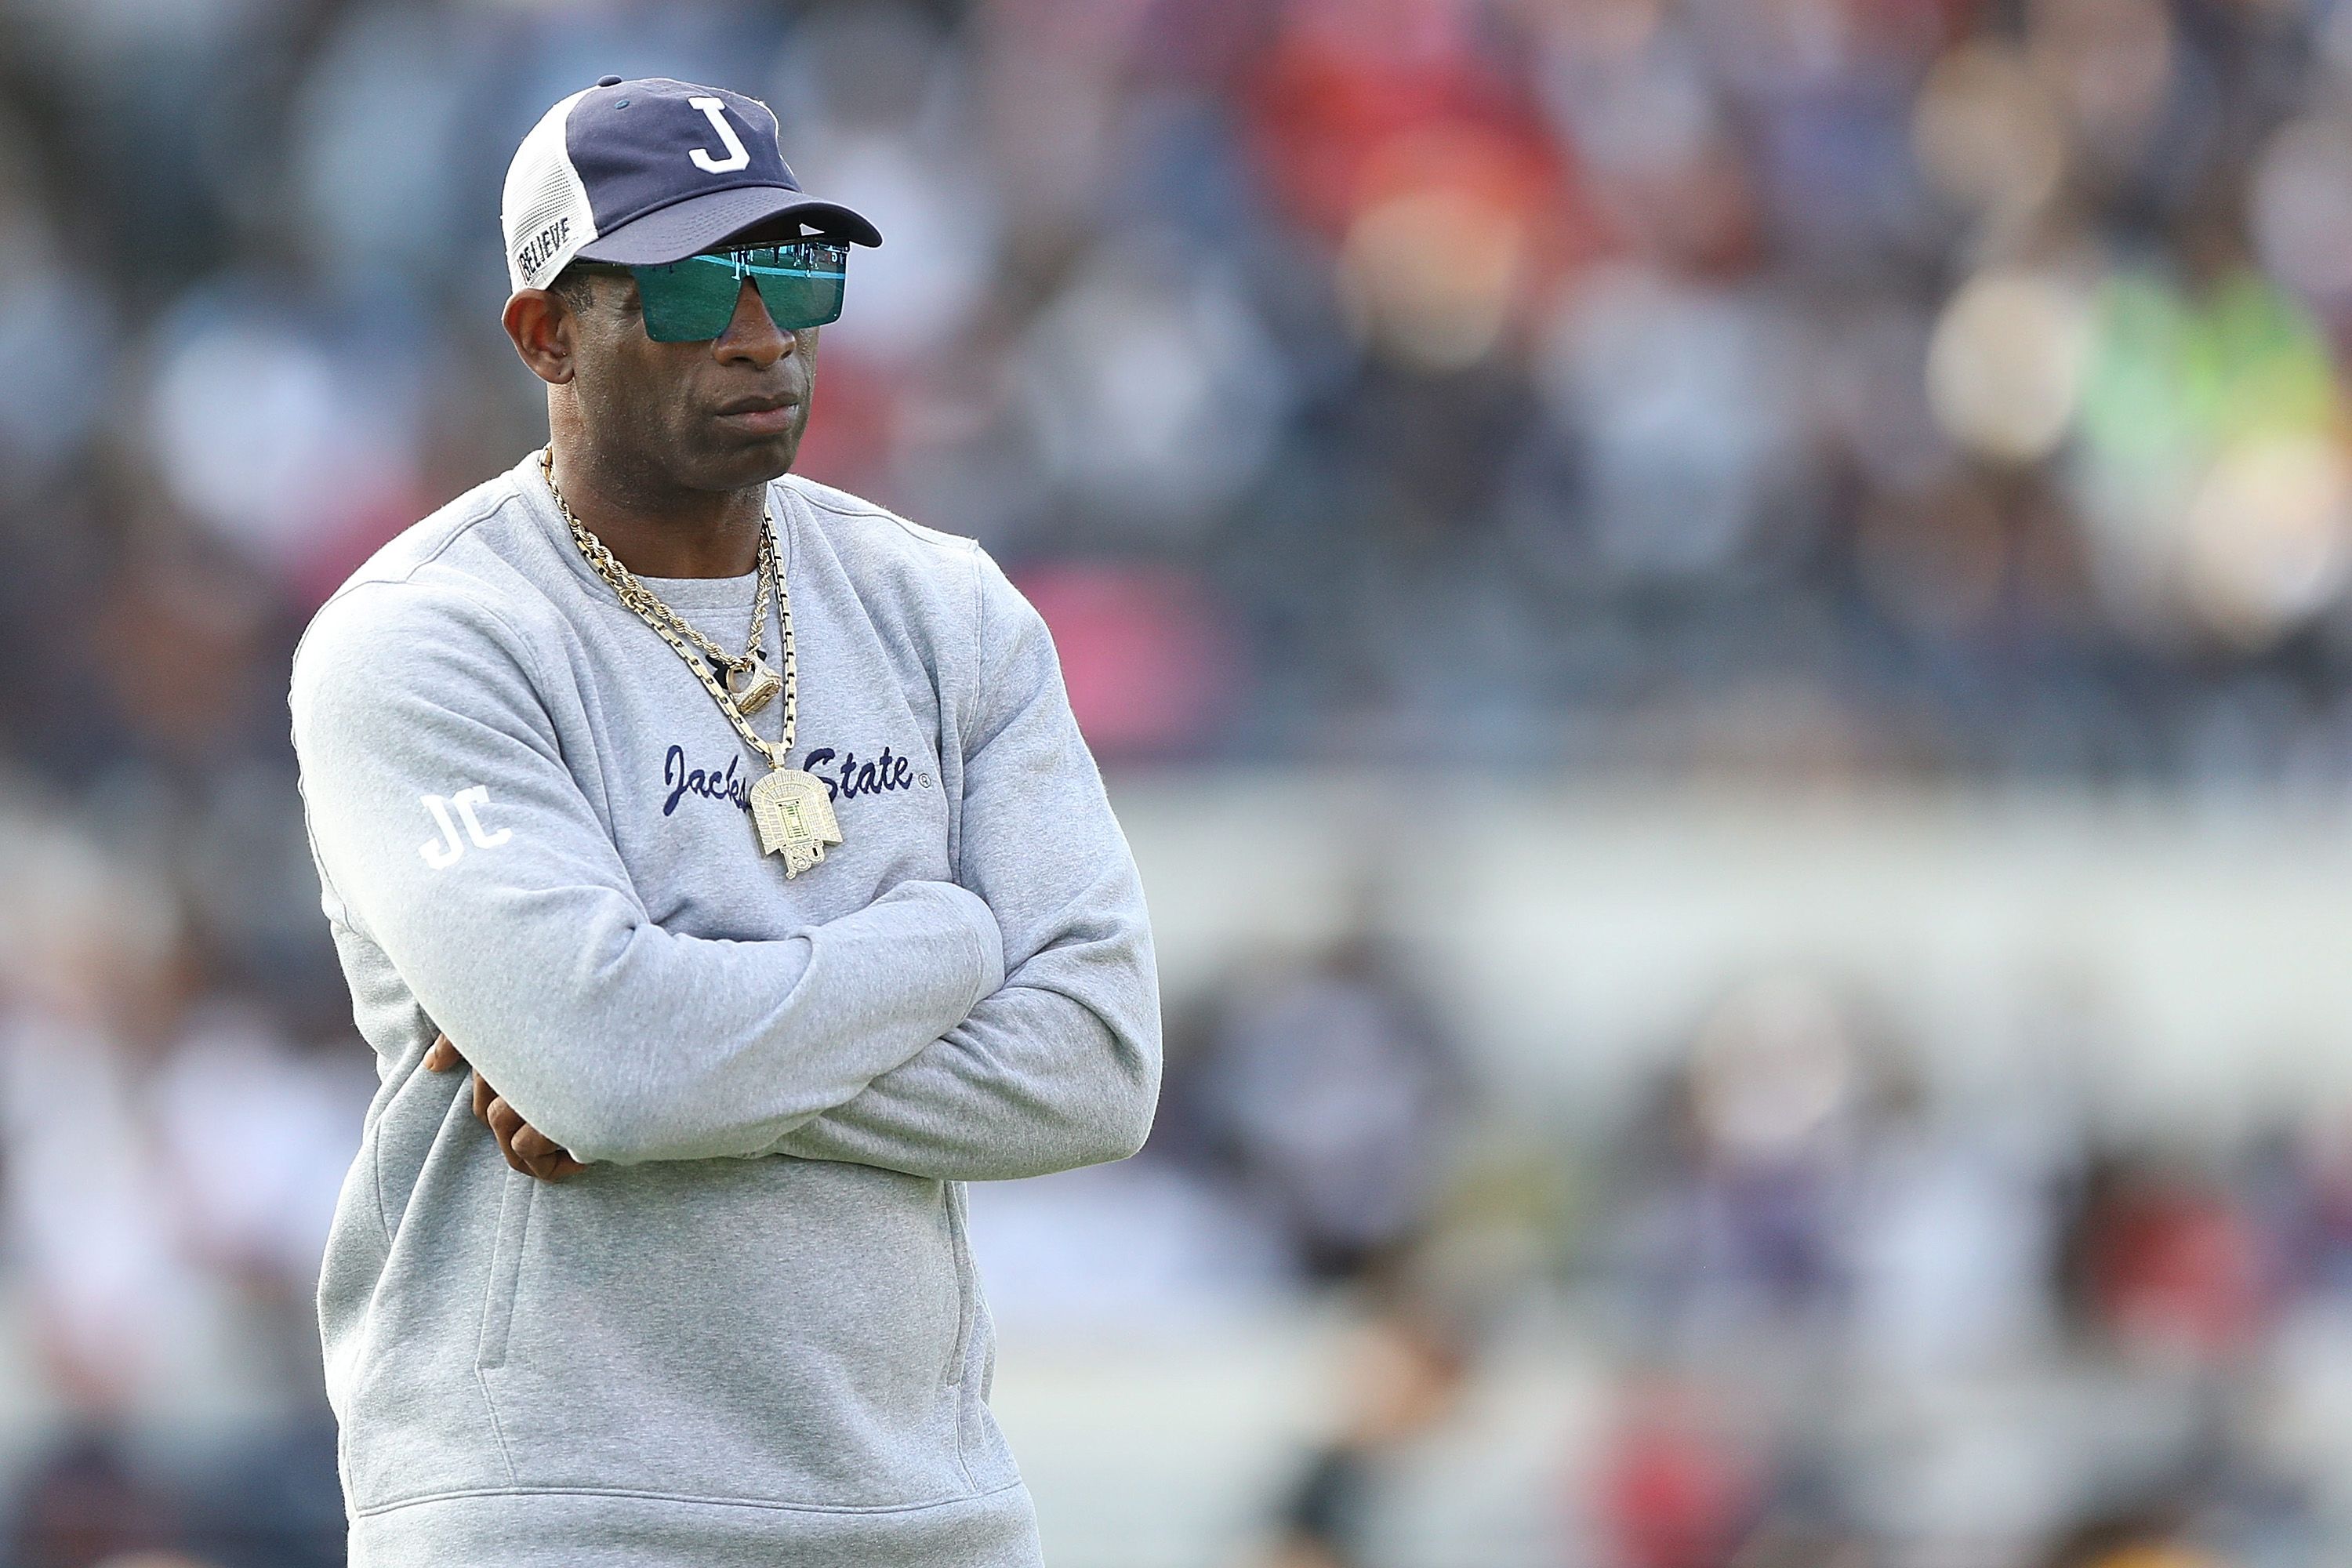 Deion Sanders decided to stop coaching at HBCU. Here's why people